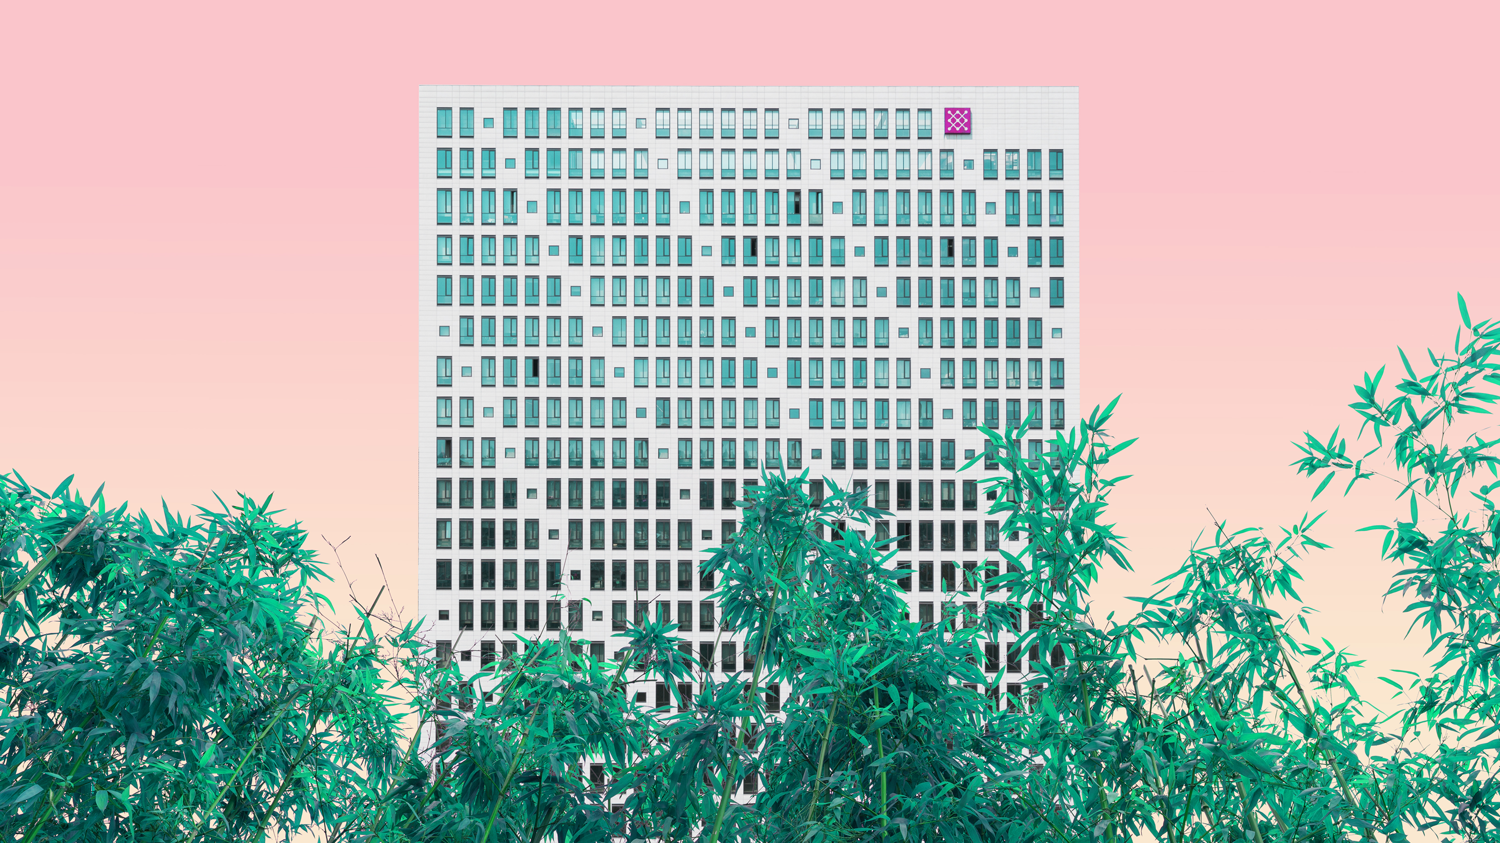 highly saturated image depicting the juxtaposition between urban architecture and nature